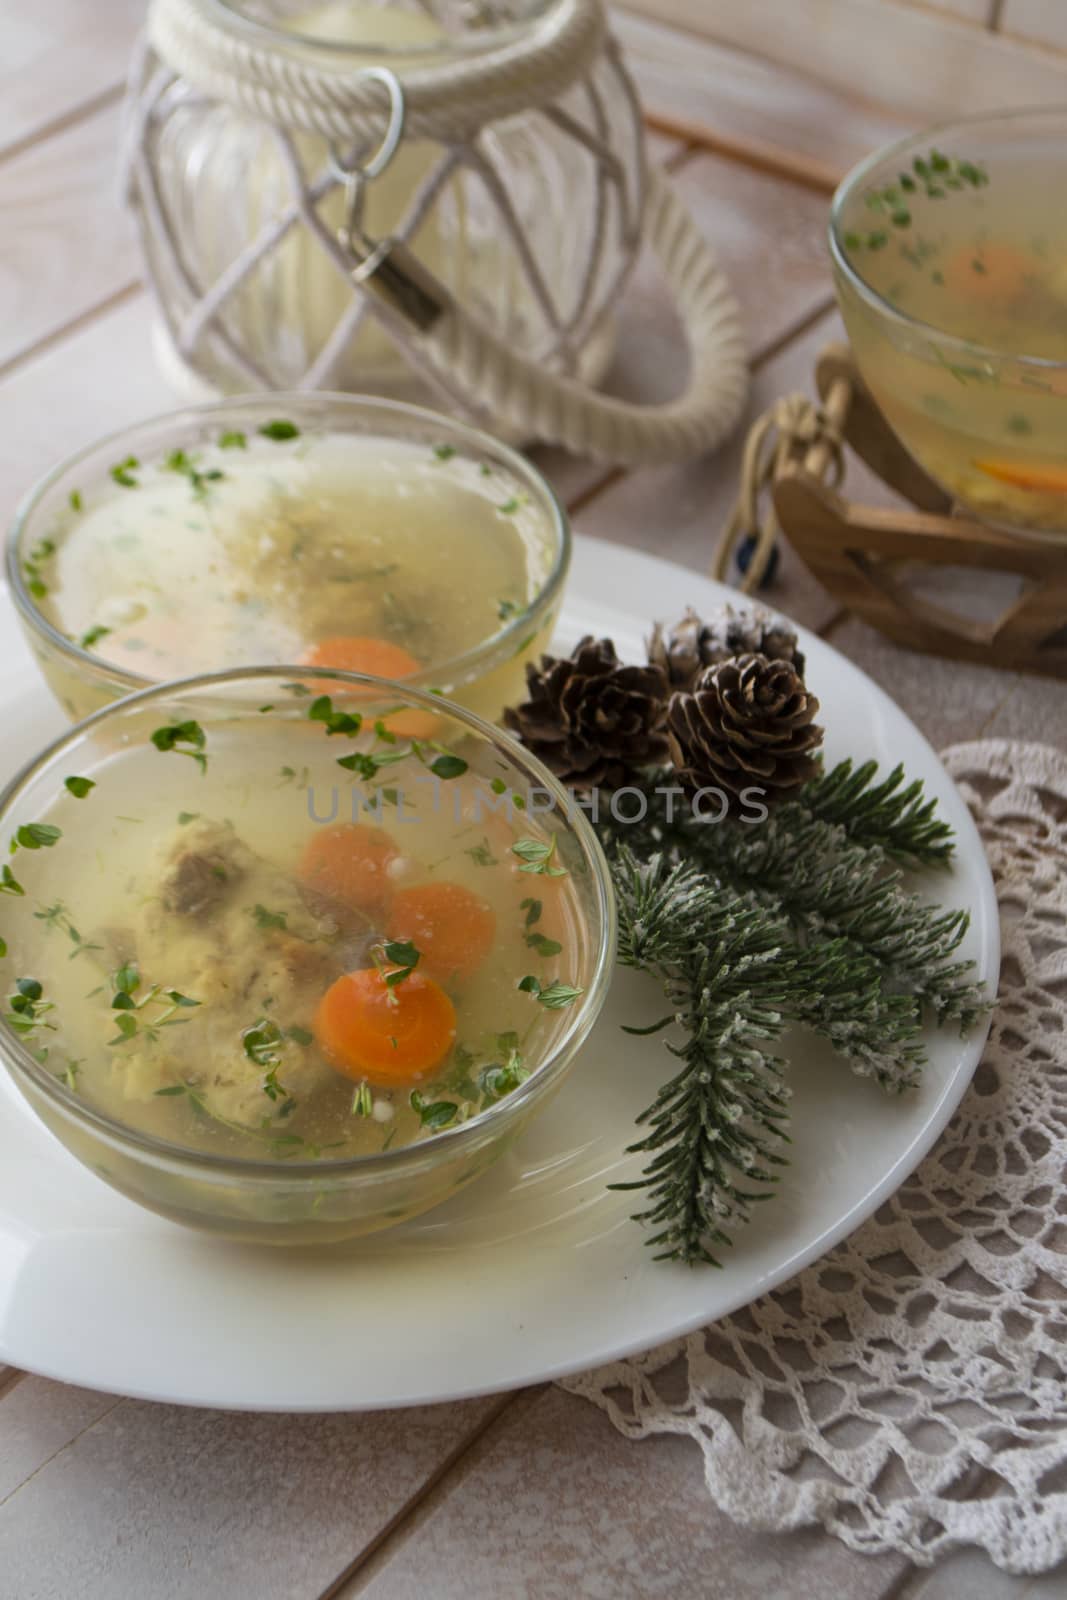 Jellied fish with egg and vegetables on an shabby table